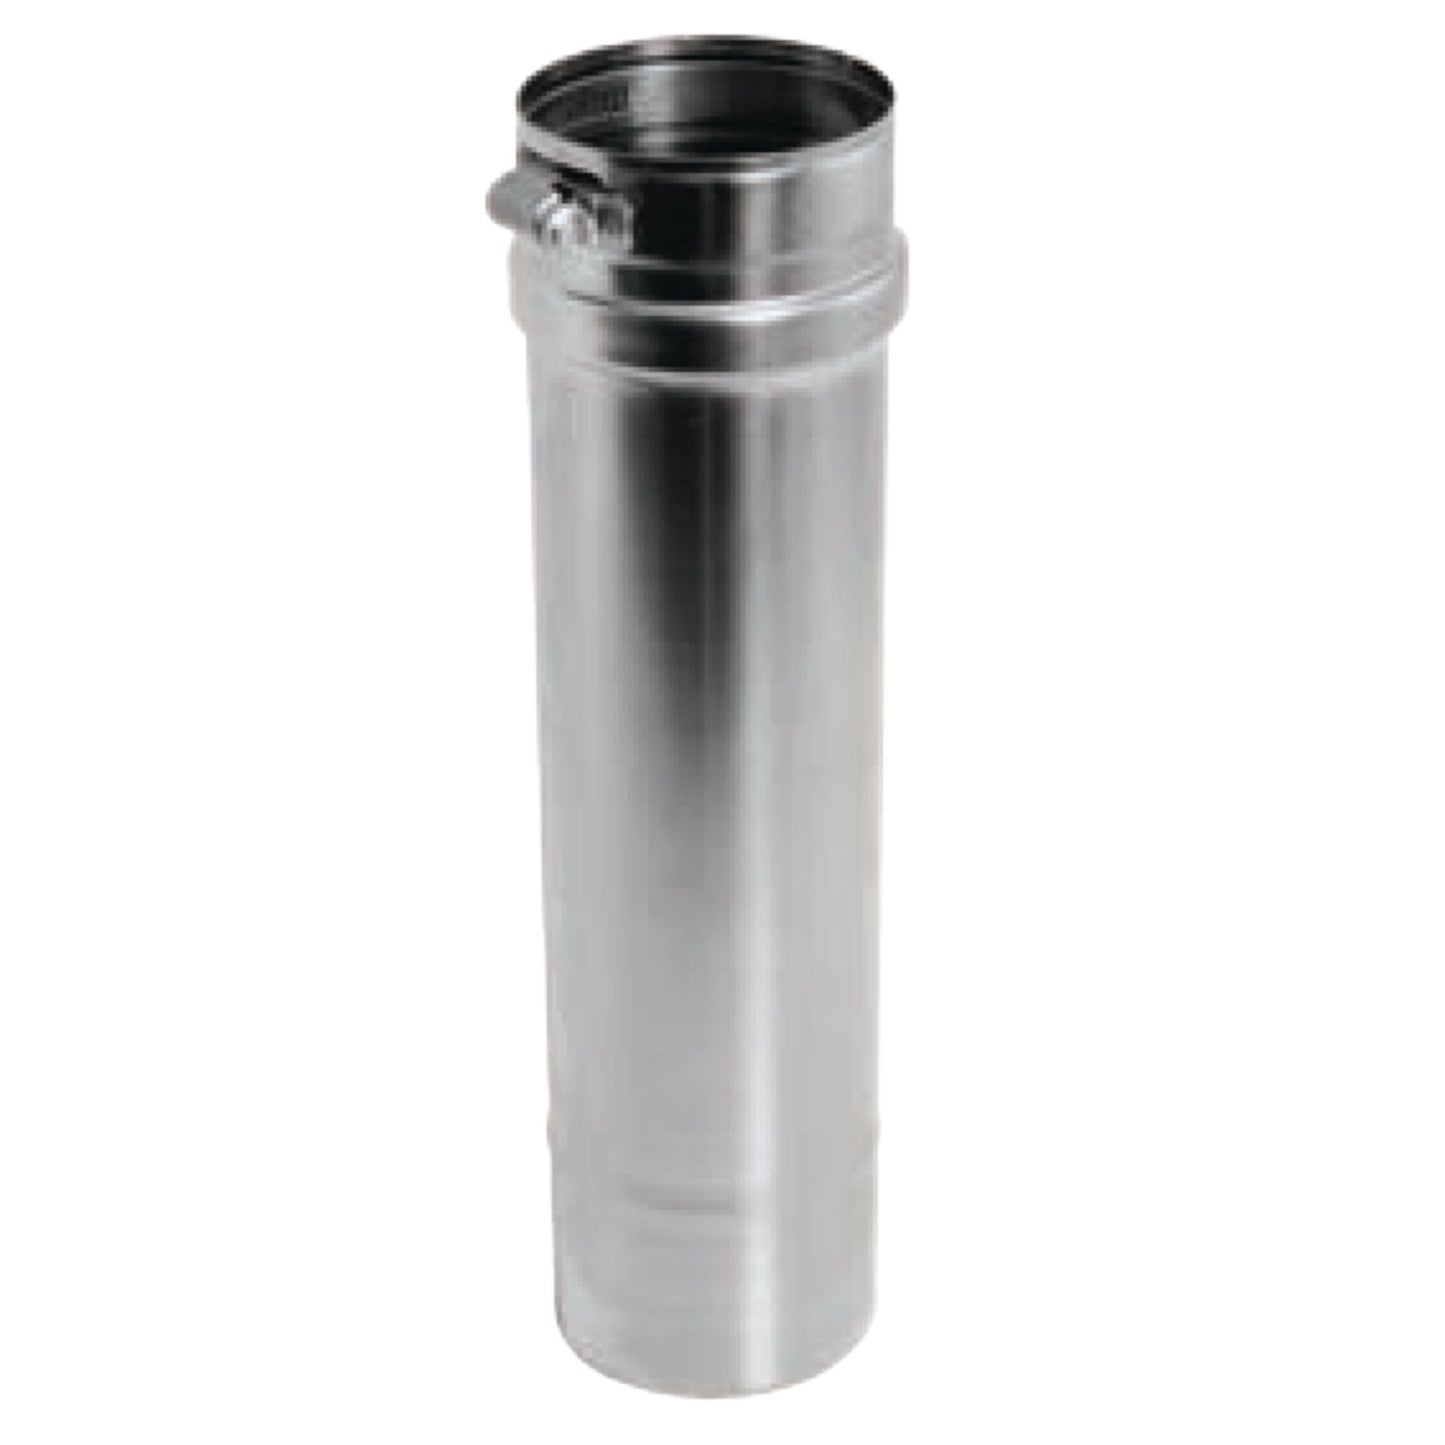 DuraVent FasNSeal 8" x 12" 316L Stainless Steel Vent Length